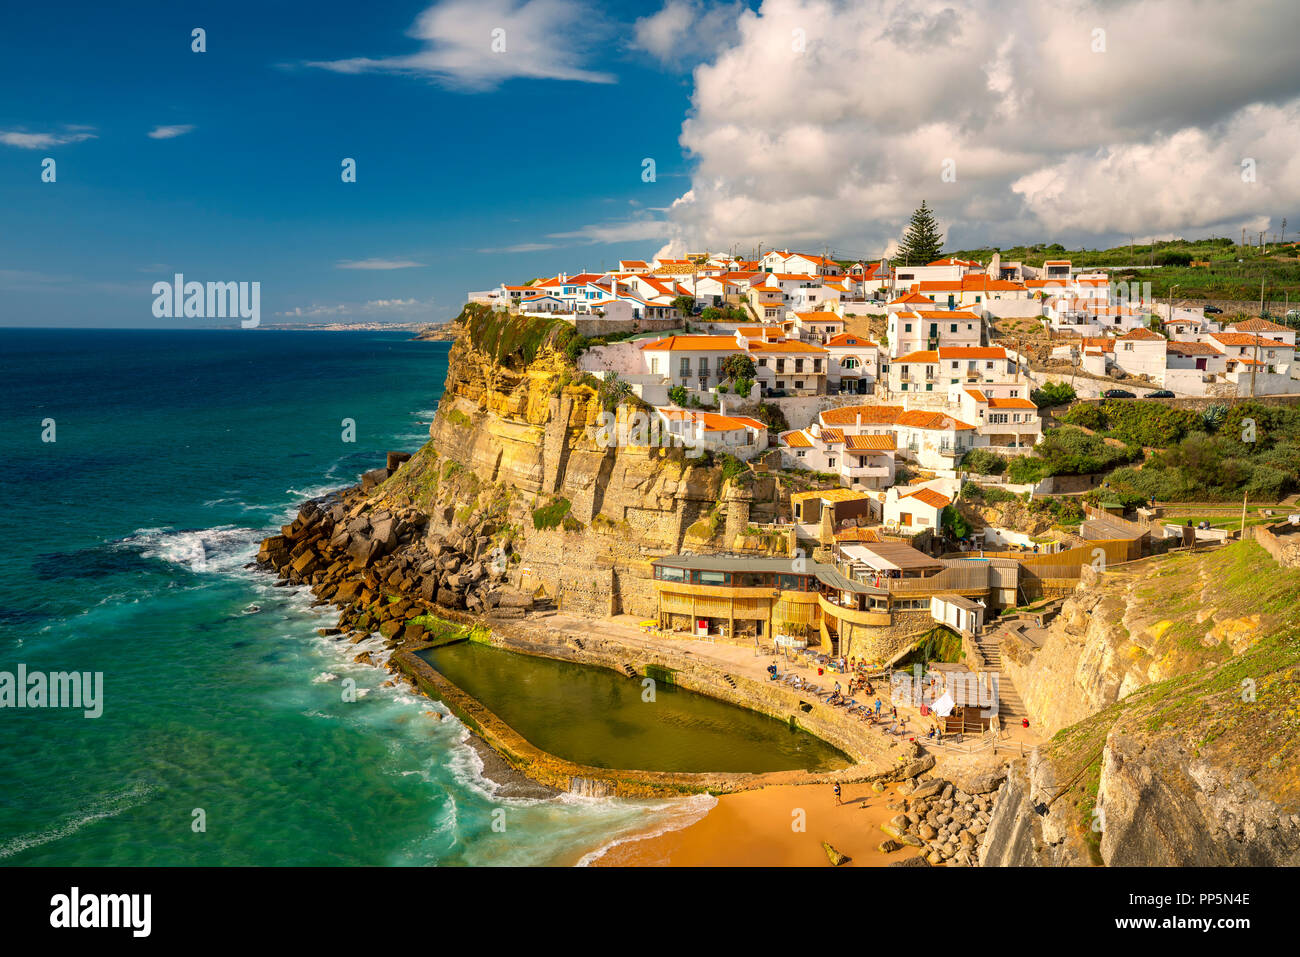 The beautiful seaside town Azenhas do Mar, Portugal, in afternoon light Stock Photo